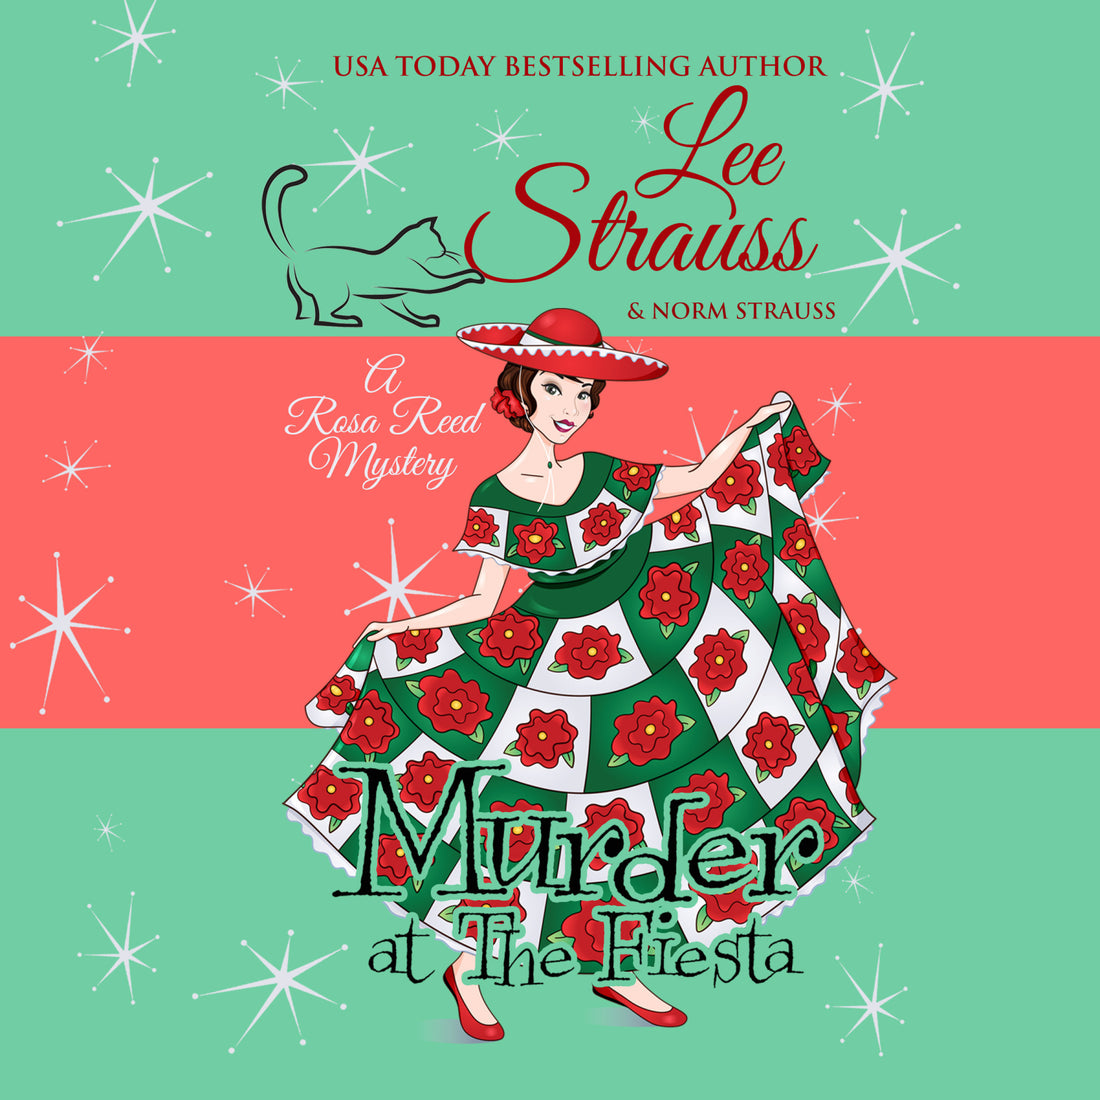 Murder at the Fiesta, a Rosa Reed Mystery by Lee Strauss